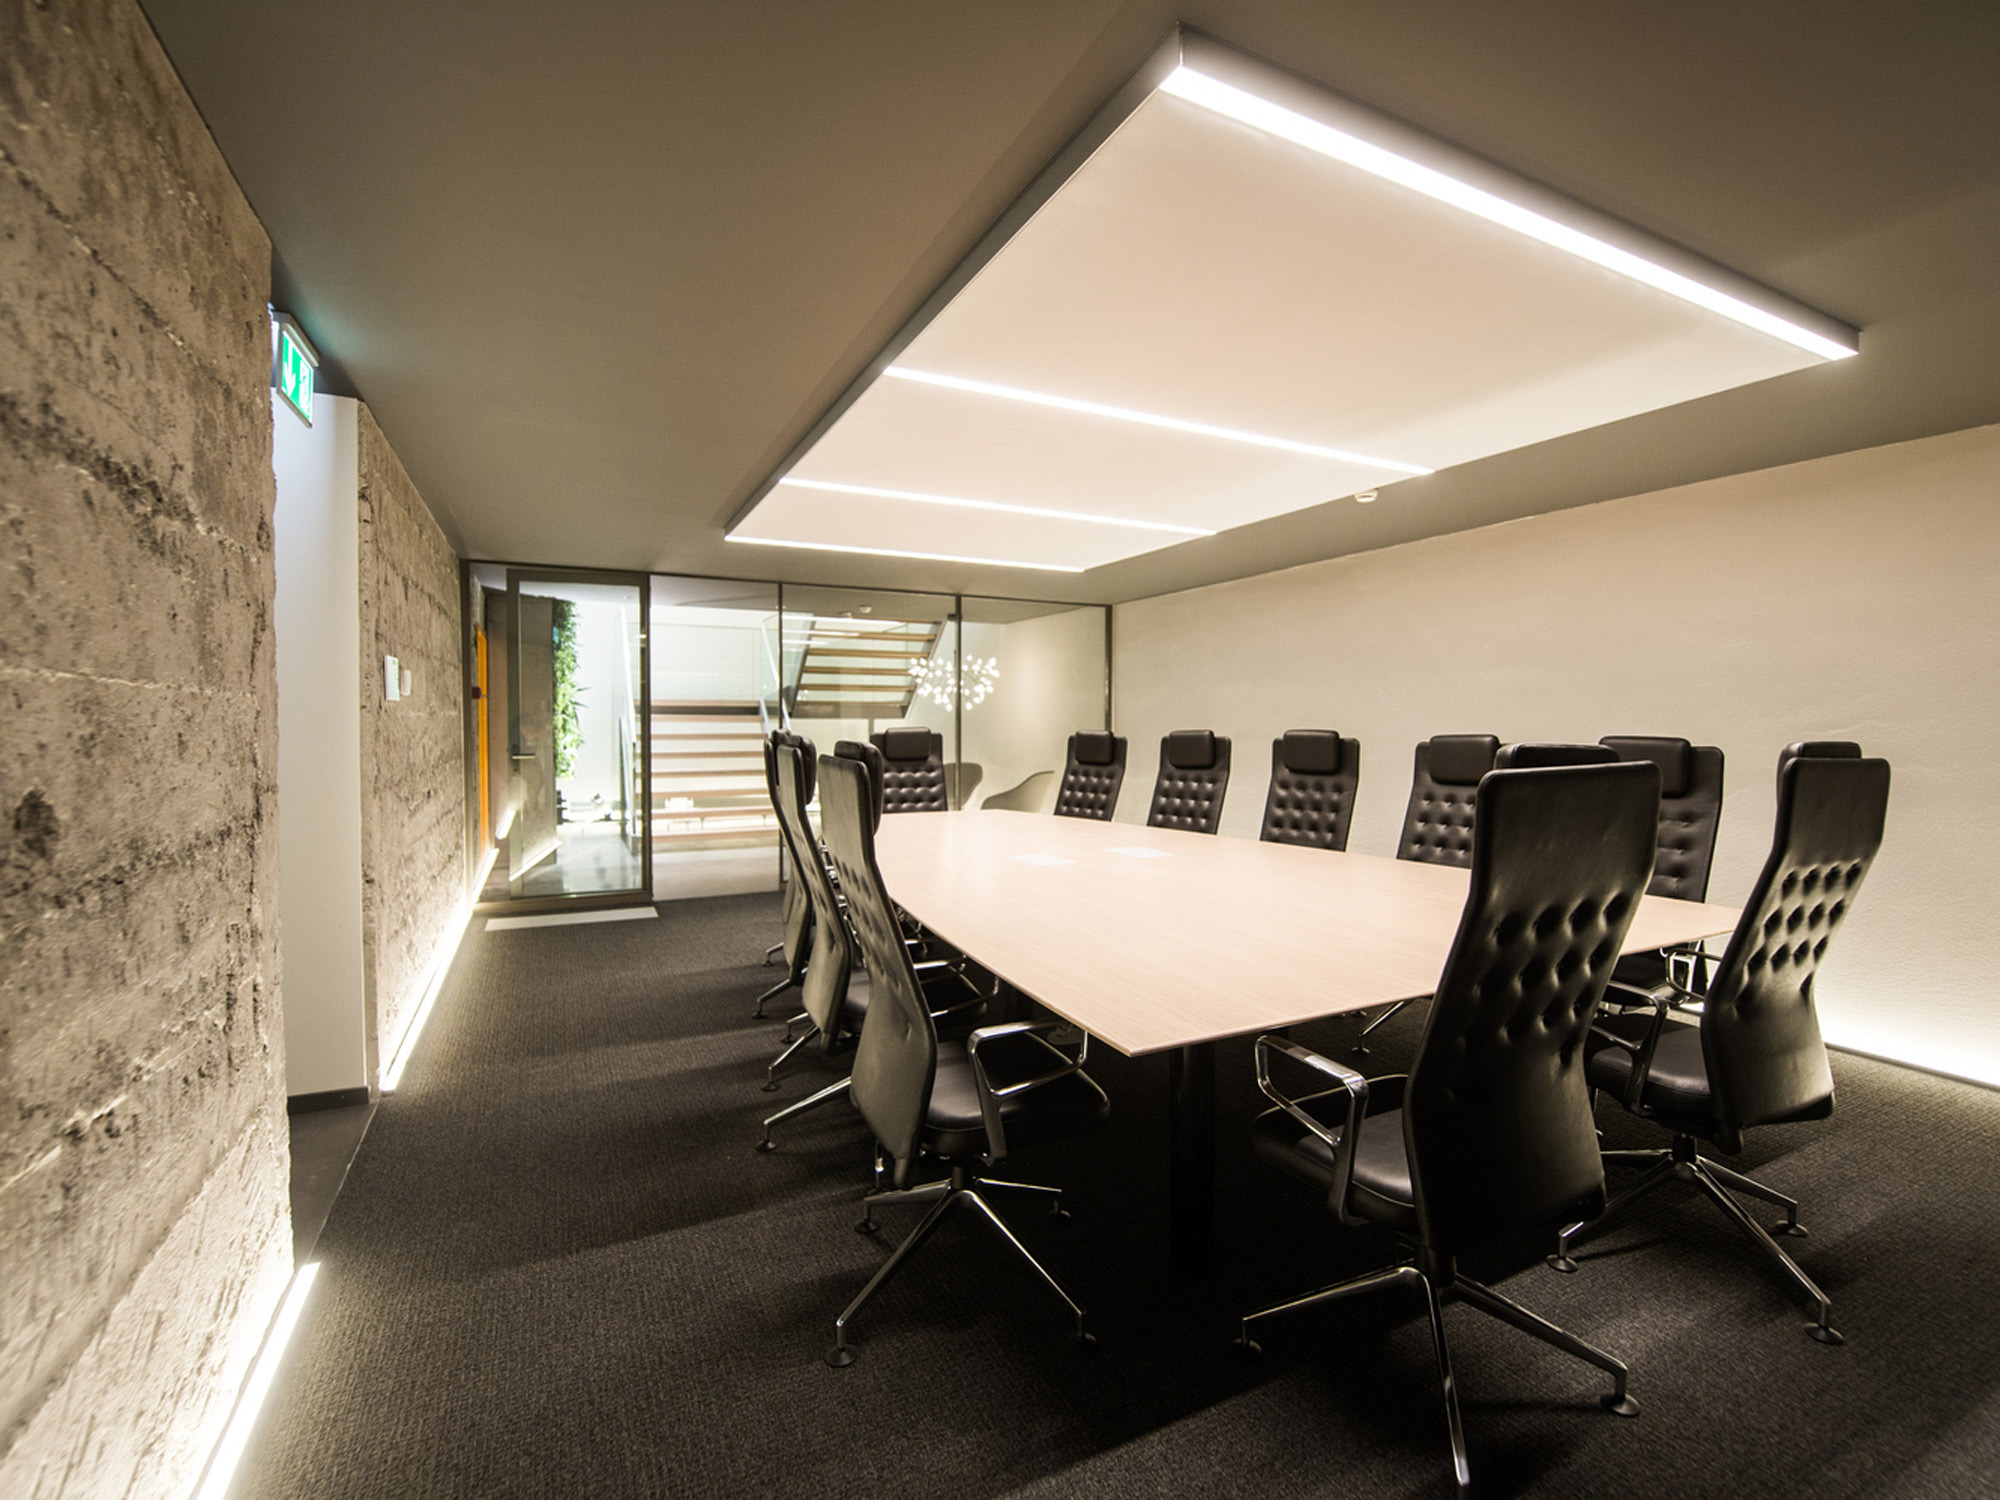 Spacious modern conference room featuring an elongated, polished wooden table, surrounded by black leather chairs, accentuated by a striking linear suspended LED lighting fixture and textured concrete walls.